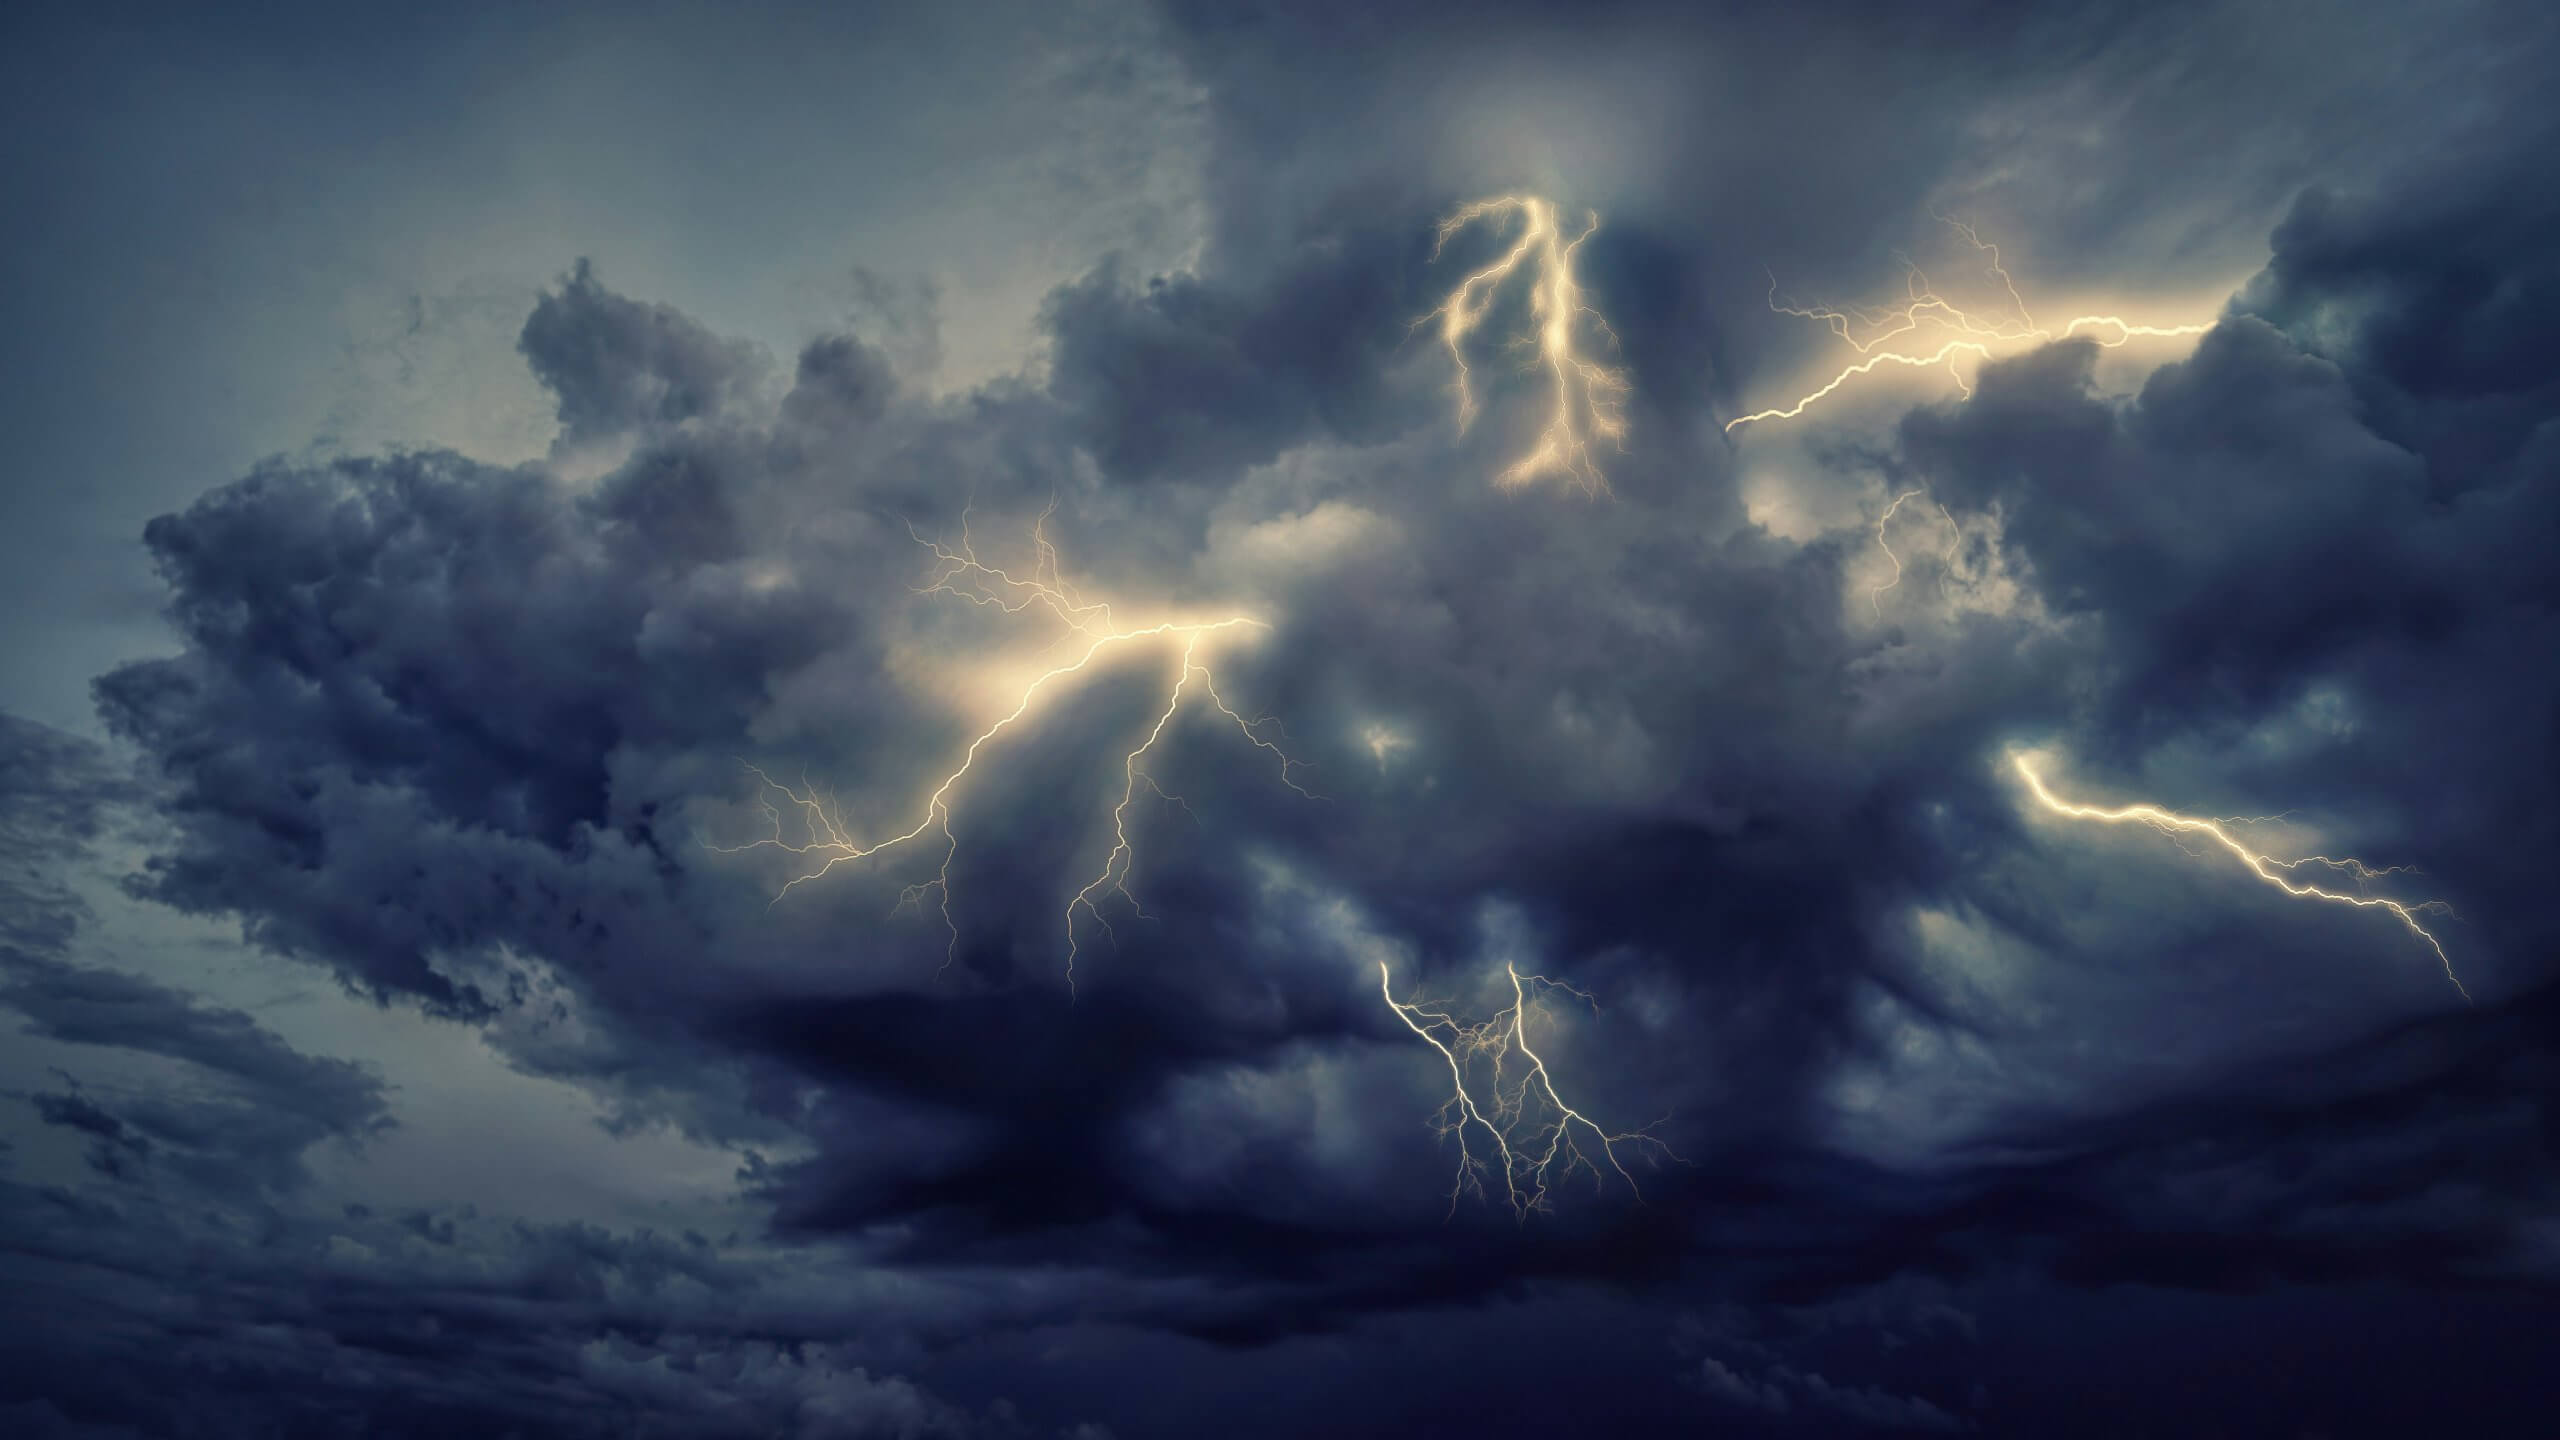 Dramatic thunderstorm clouds with multiple lightning bolts striking through. Navigating thunderstorms with children can be difficult but the tips in this blog can help you manage thunderstorms and child anxiety.